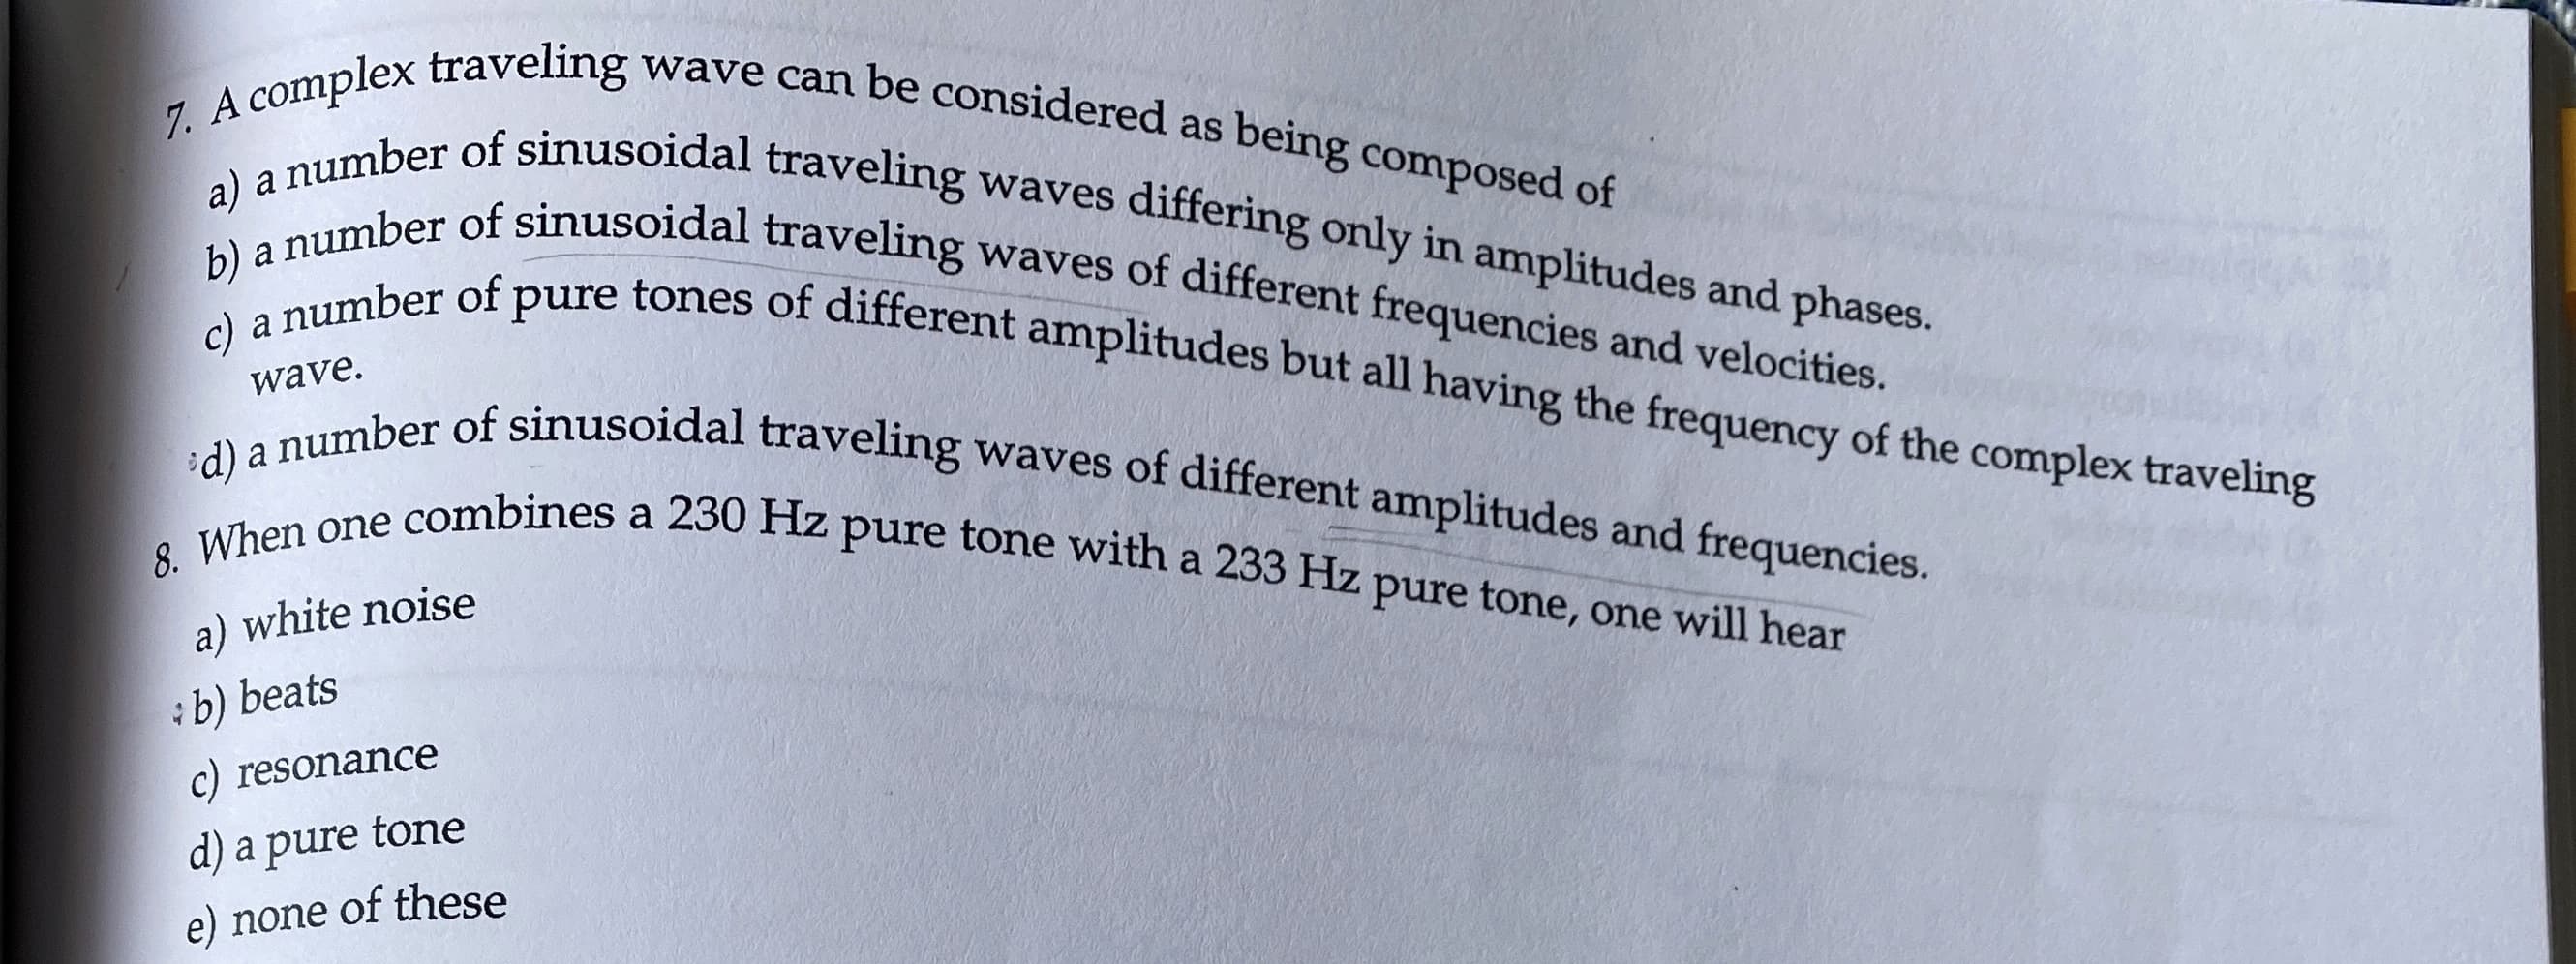 wave can be considered as being composed of
7. A complex traveling
a) a number of sinusoidal traveling waves differing only in amplitudes and phases.
b) a number of sinusoidal traveling waves of different frequencies and velocities.
c) a number of pure tones of different amplitudes but all having the frequency of the complex traveling
d) a number of sinusoidal traveling waves of different amplitudes and frequencies.
8. When one combines a 230 Hz pure tone with a 233 Hz pure tone, one will hear
wave.
a) white noise
:b) beats
c) resonance
d) a pure tone
e) none of these
